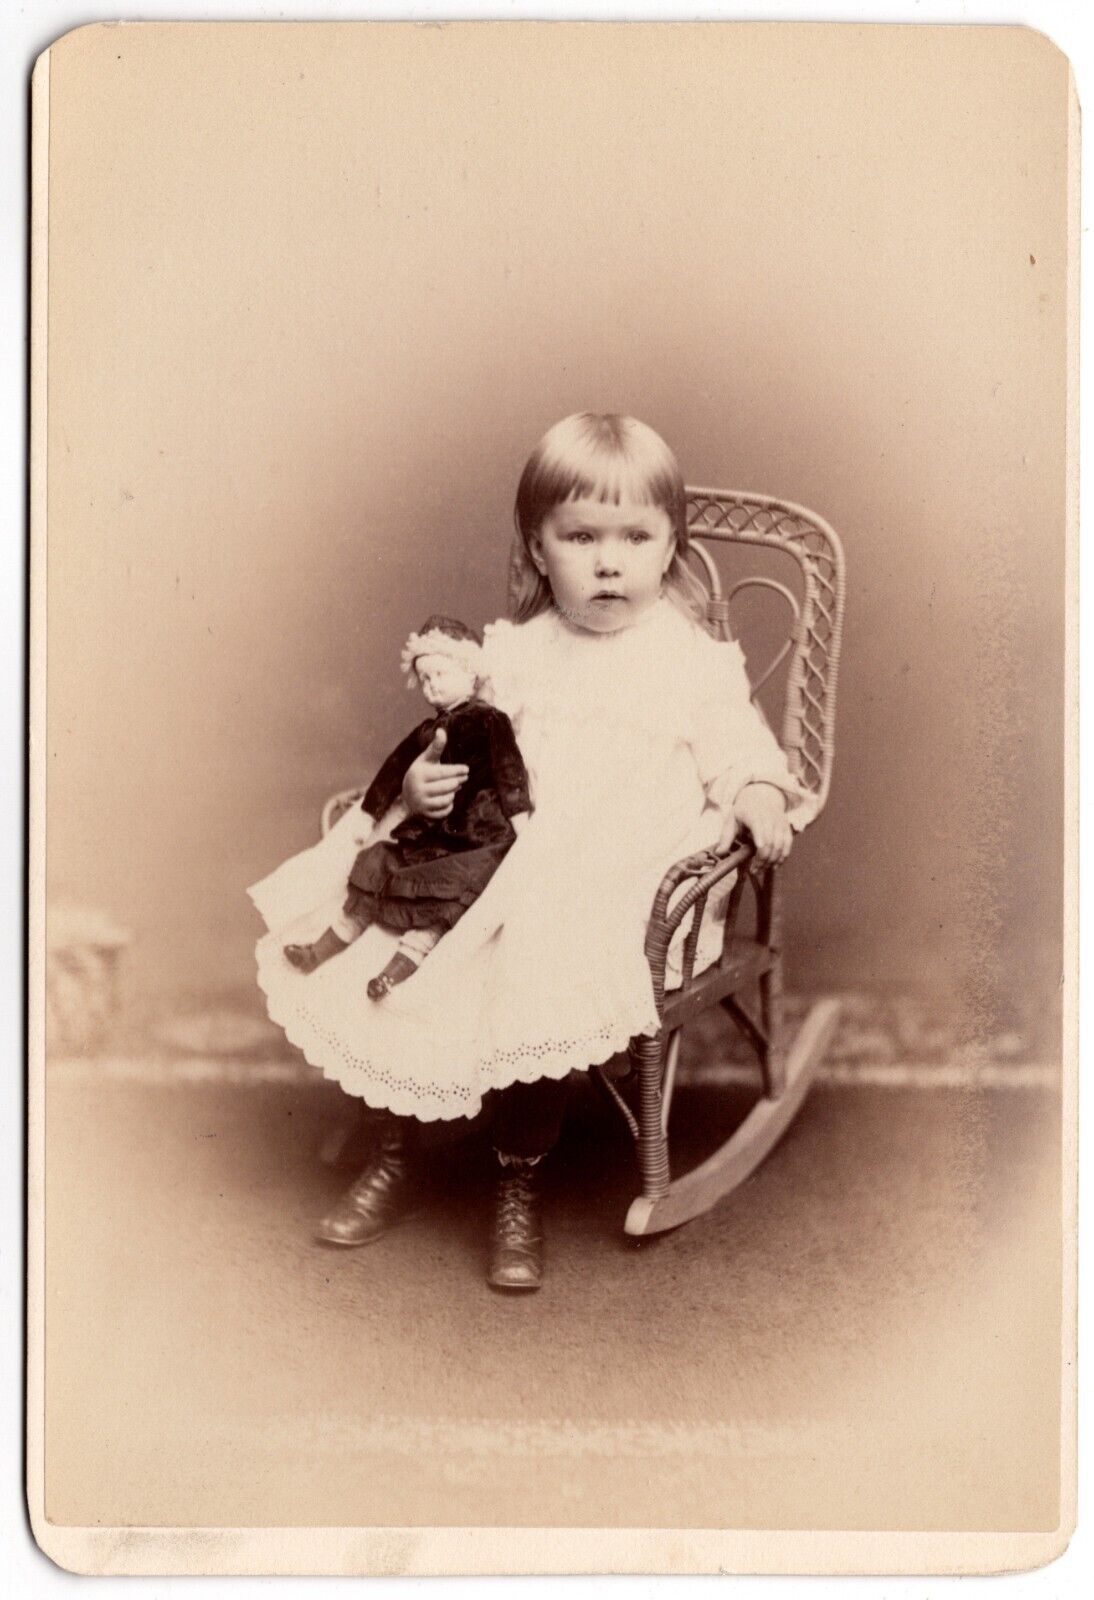 CIRCA 1890s CABINET CARD ALLEN & ROWELL CUTE YOUNG GIRL HOLDING DOLL BOSTON MA.